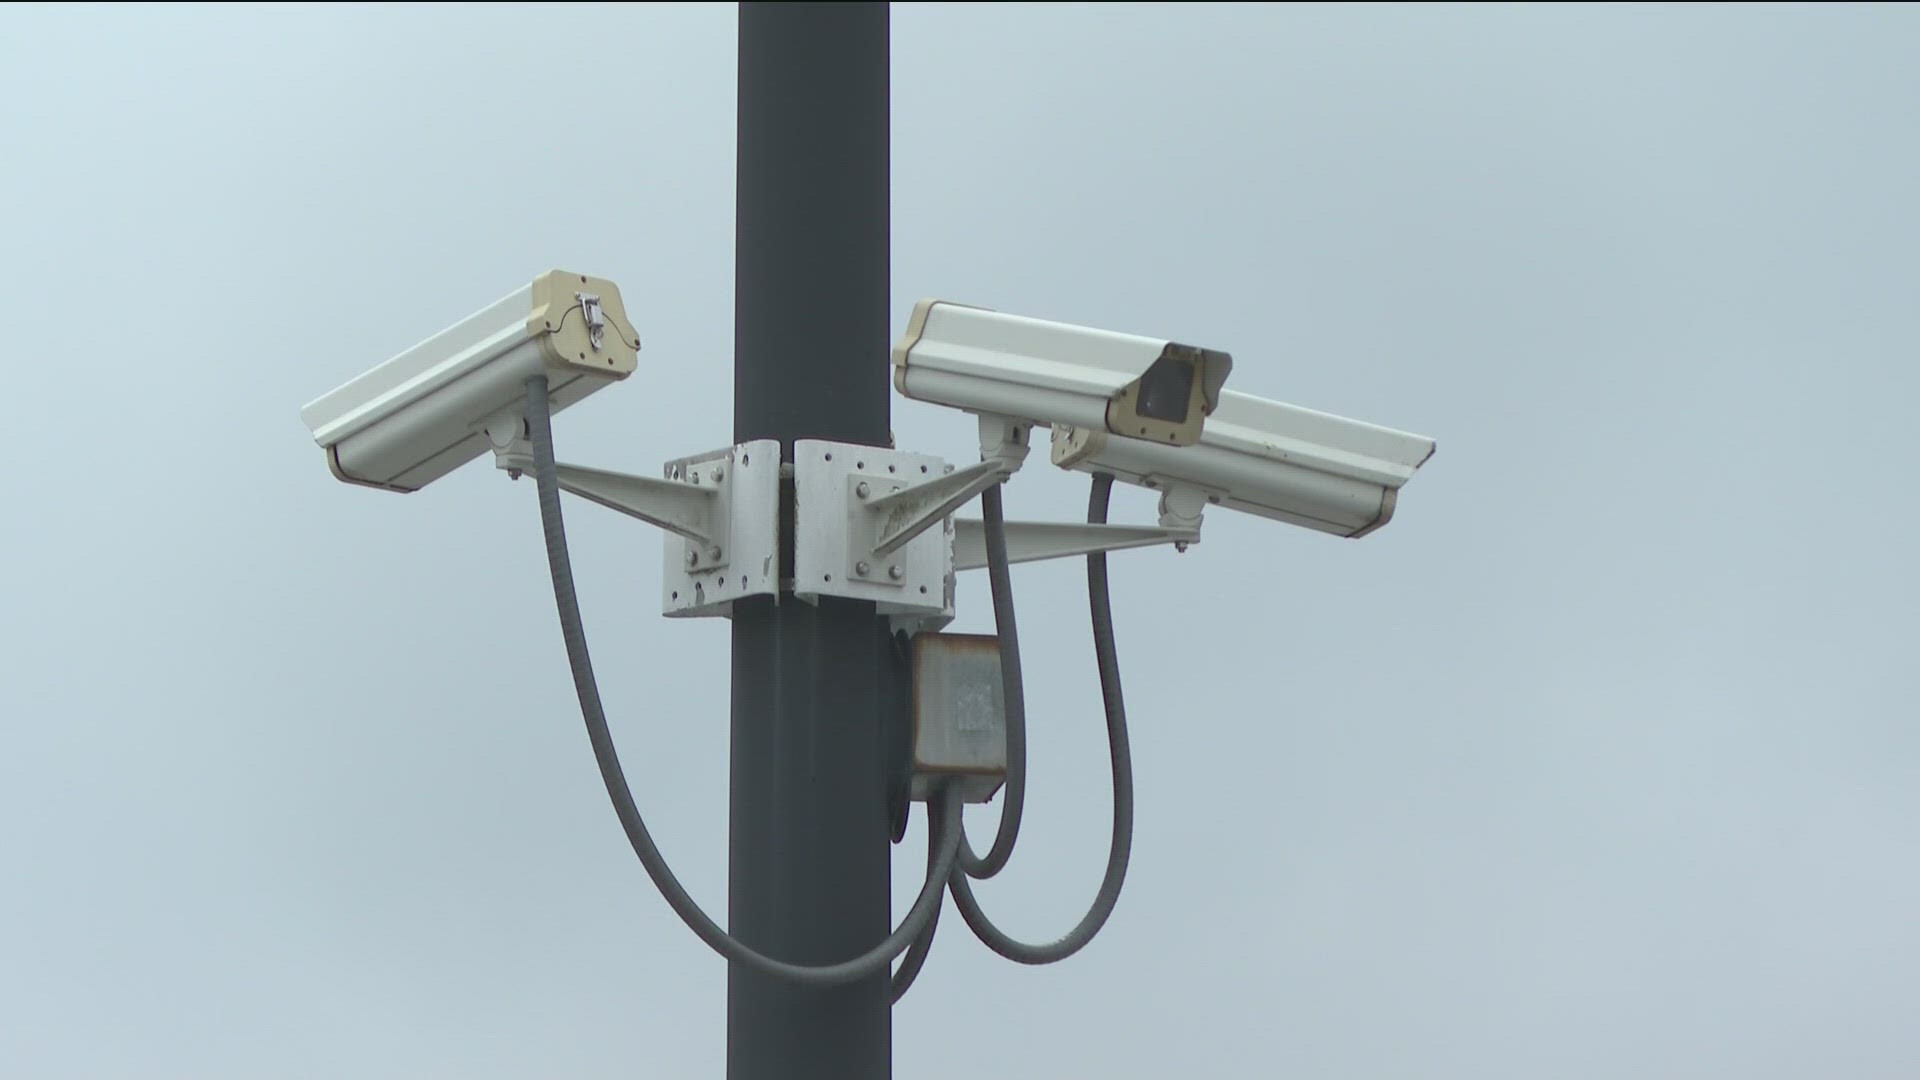 The bill, introduced by the Georgia Senate, wants to use surveillance to send citations to violators